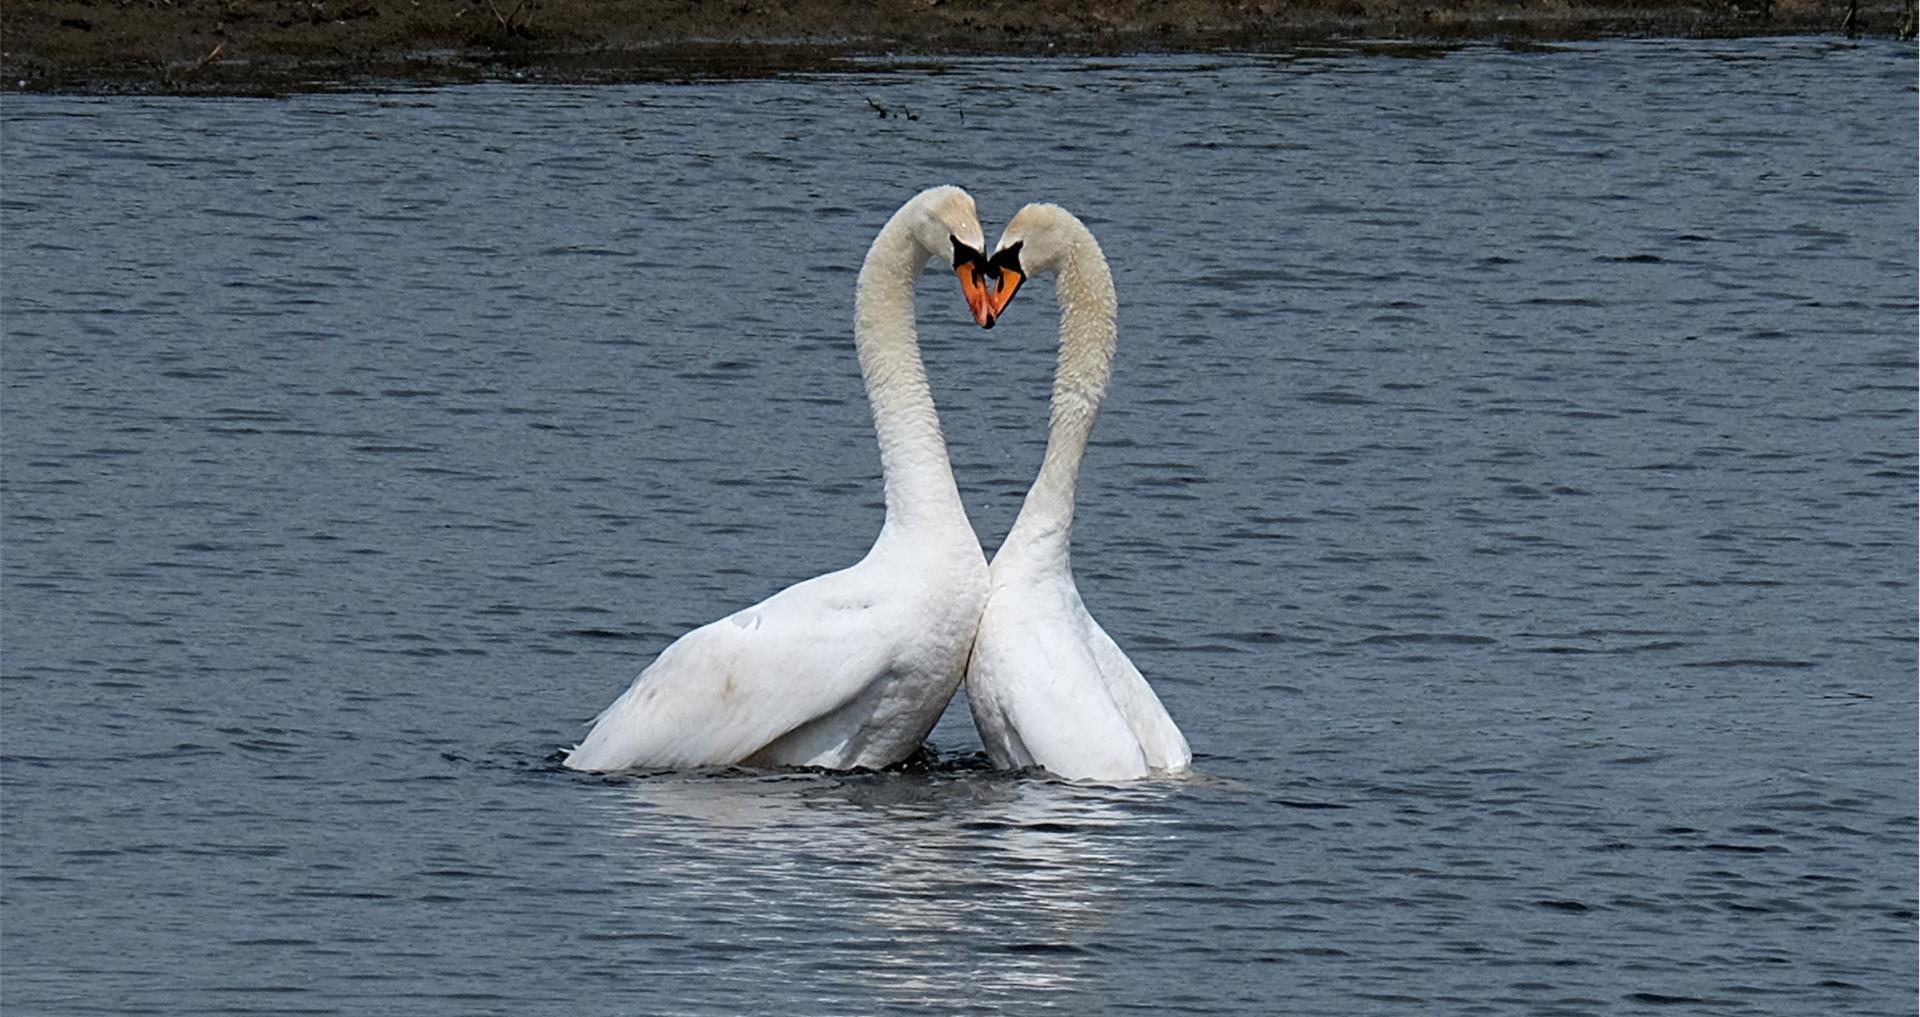 Swans out on the water